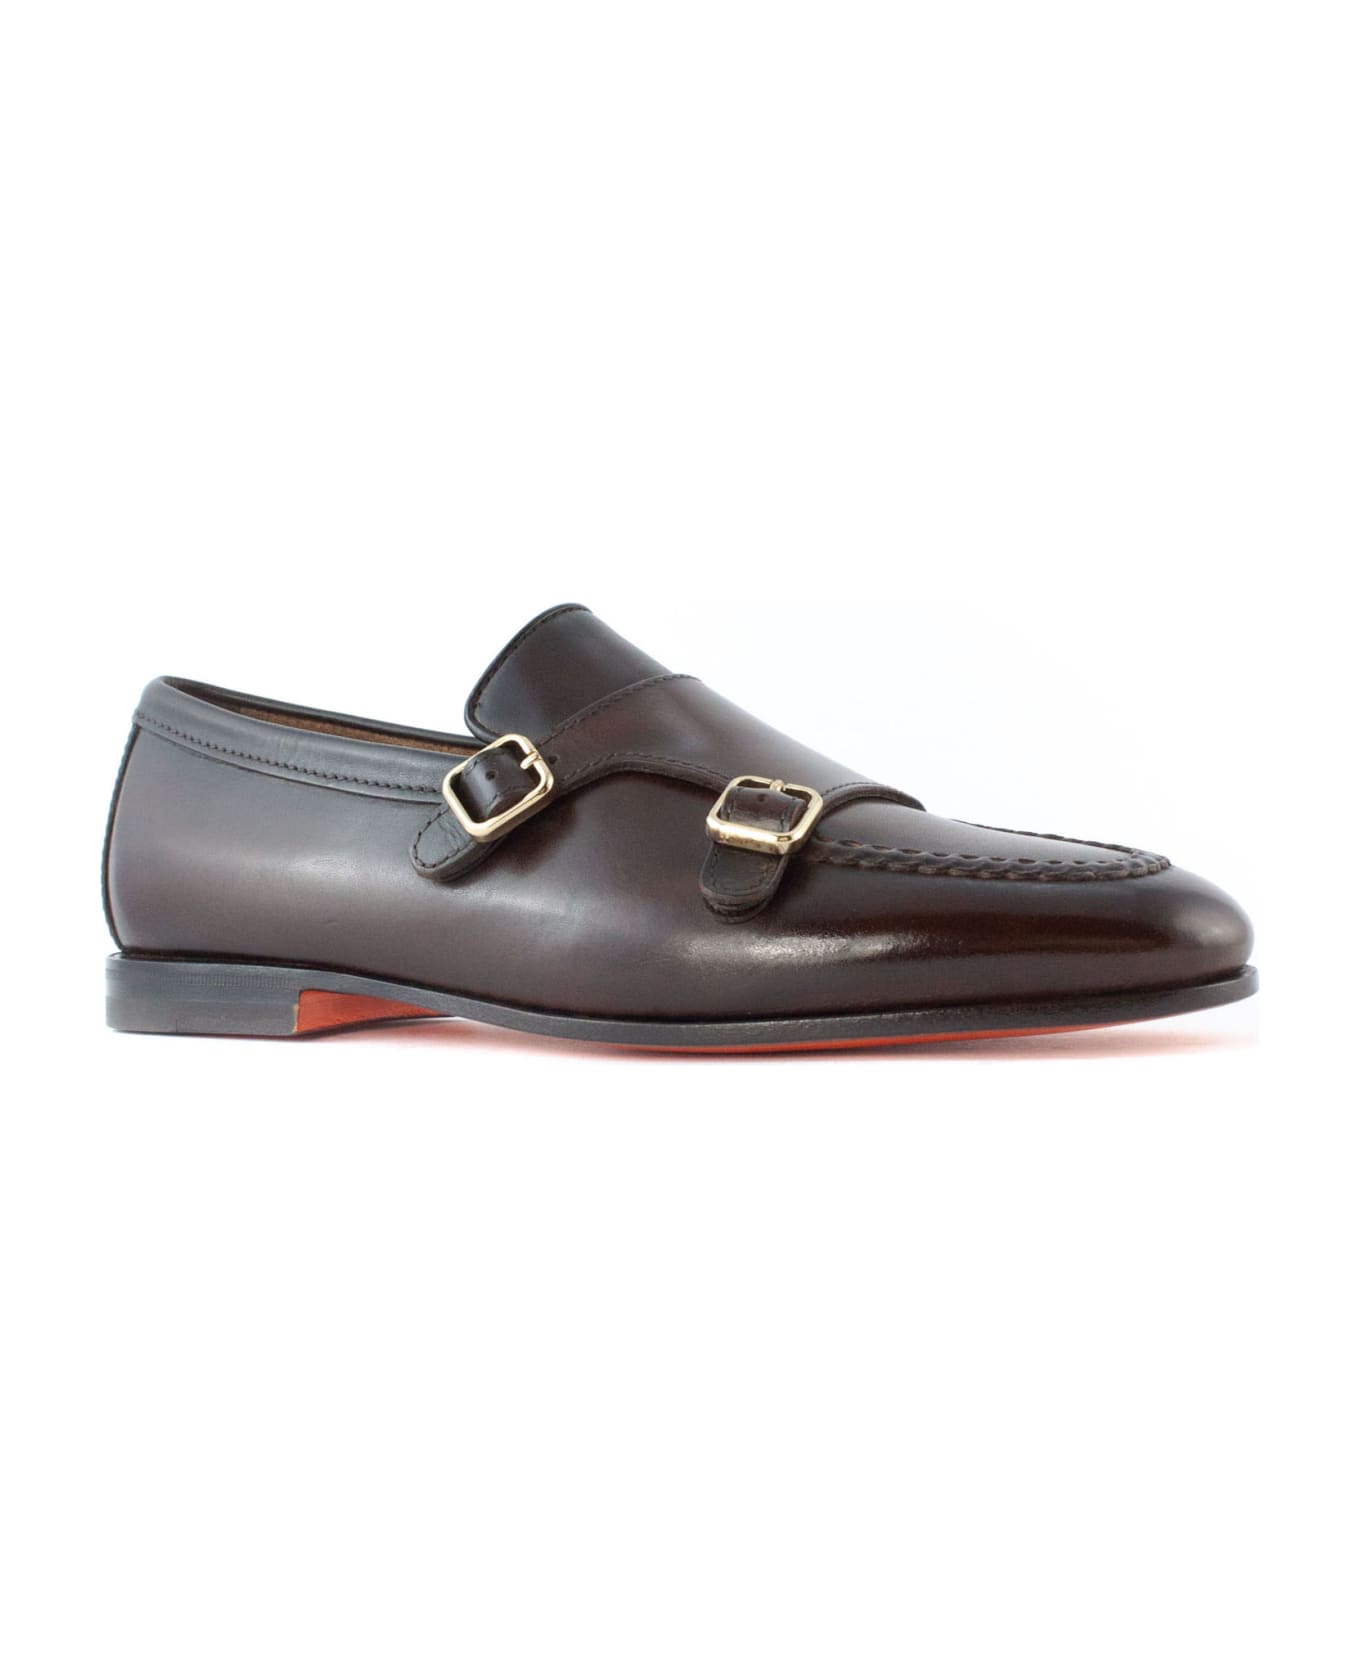 Santoni Brown Leather Double-buckle Loafer - BROWN ローファー＆デッキシューズ